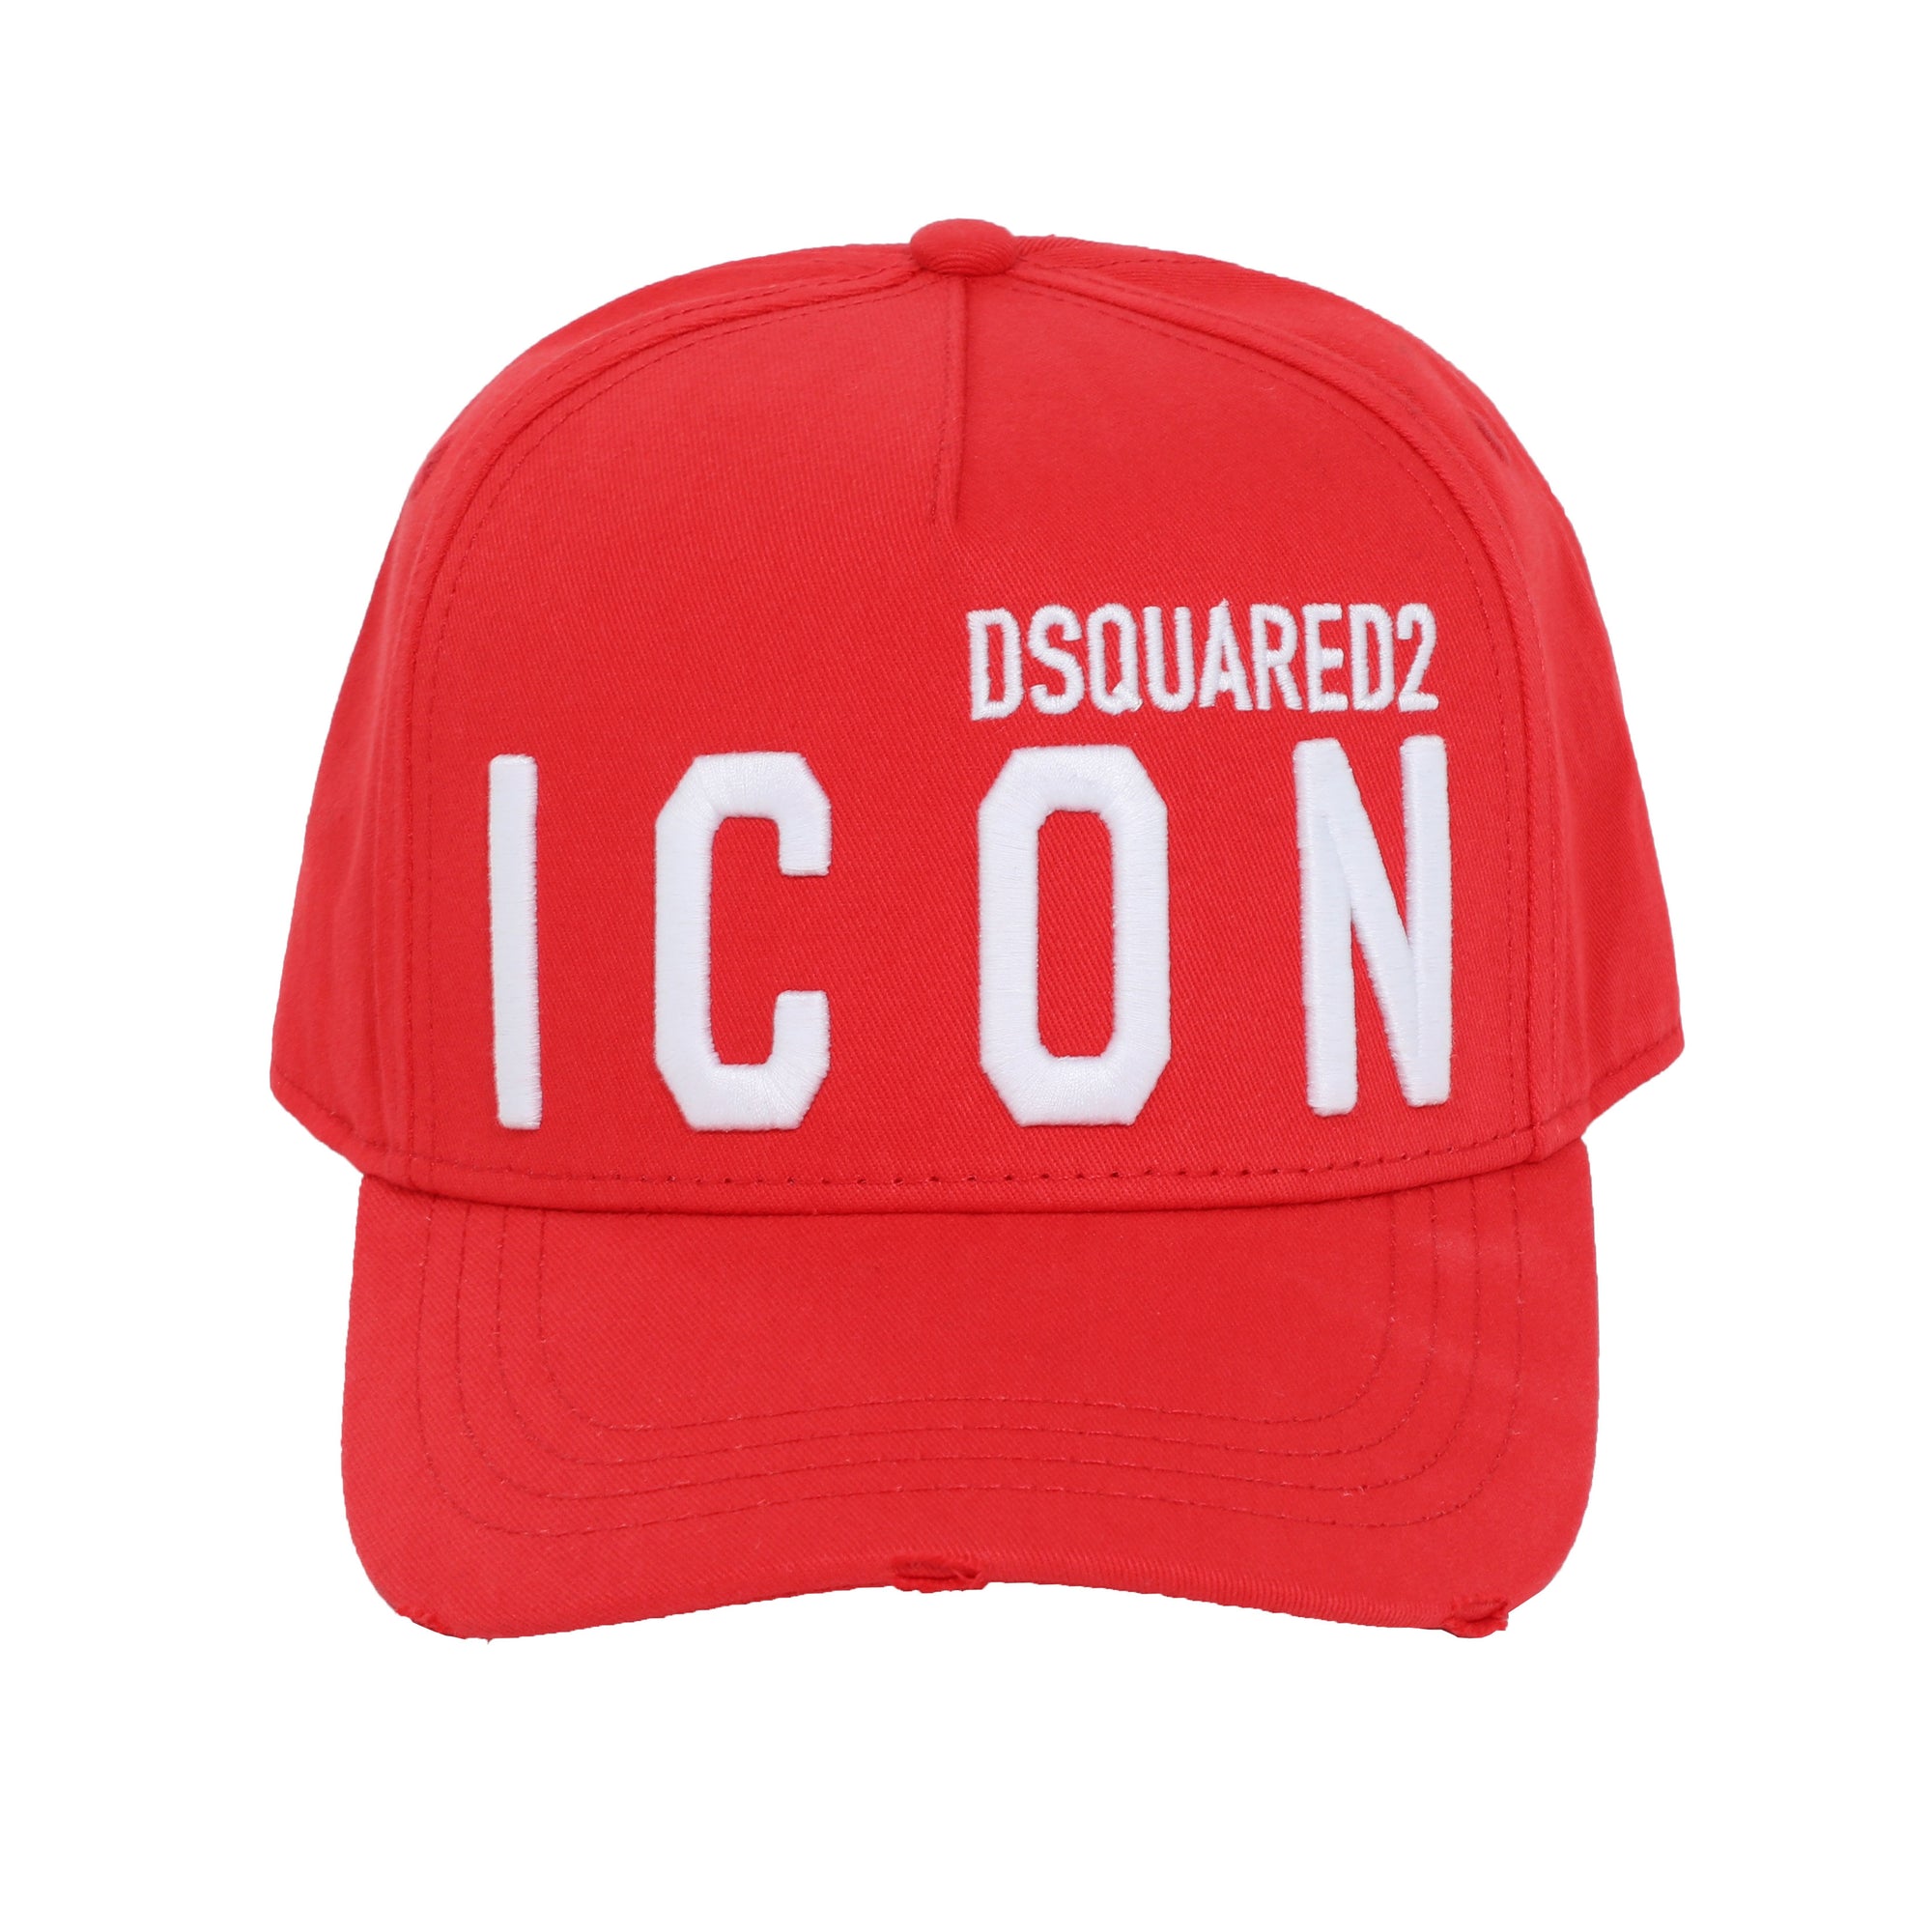 BE ICON BASEBALL CAP - RED